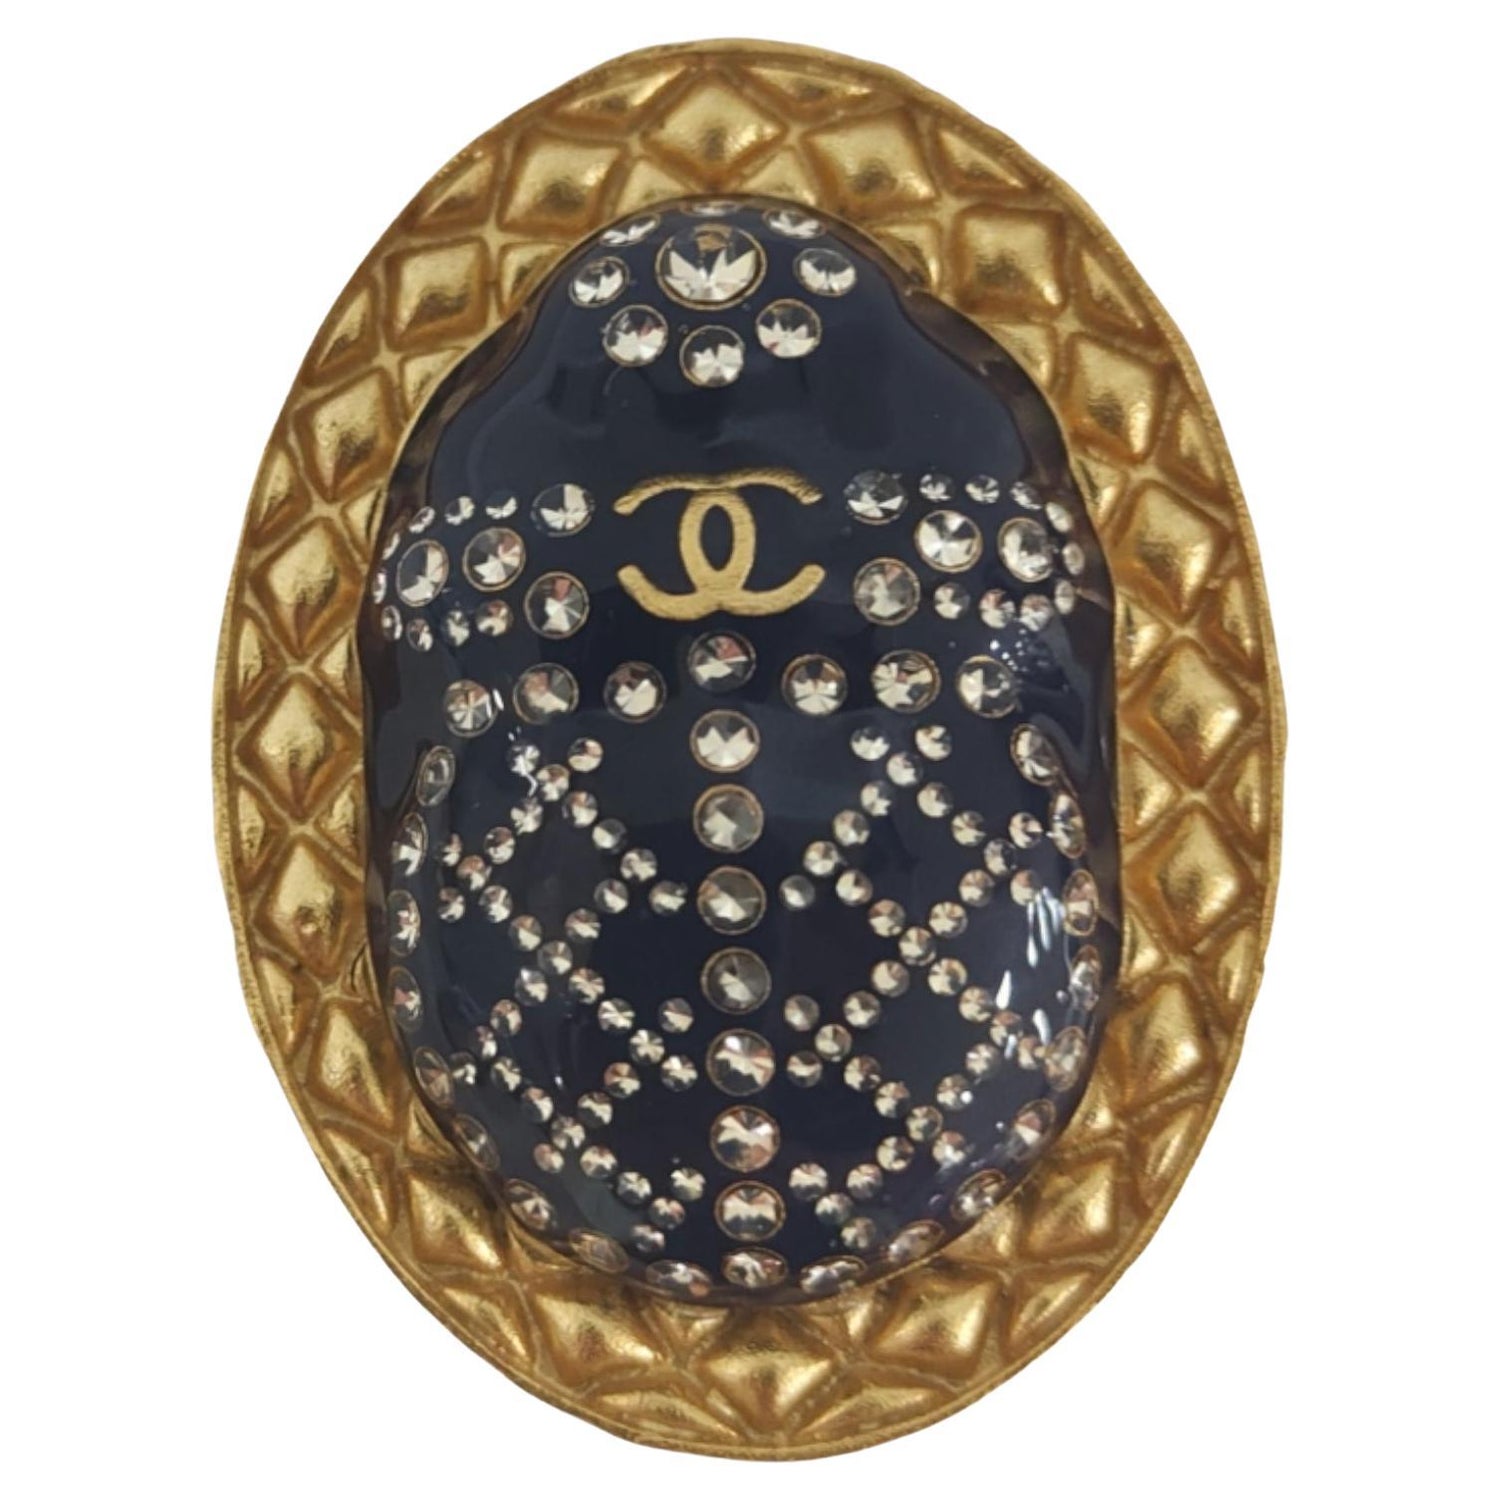 Chanel Cc Brooch 2019 - 2 For Sale on 1stDibs